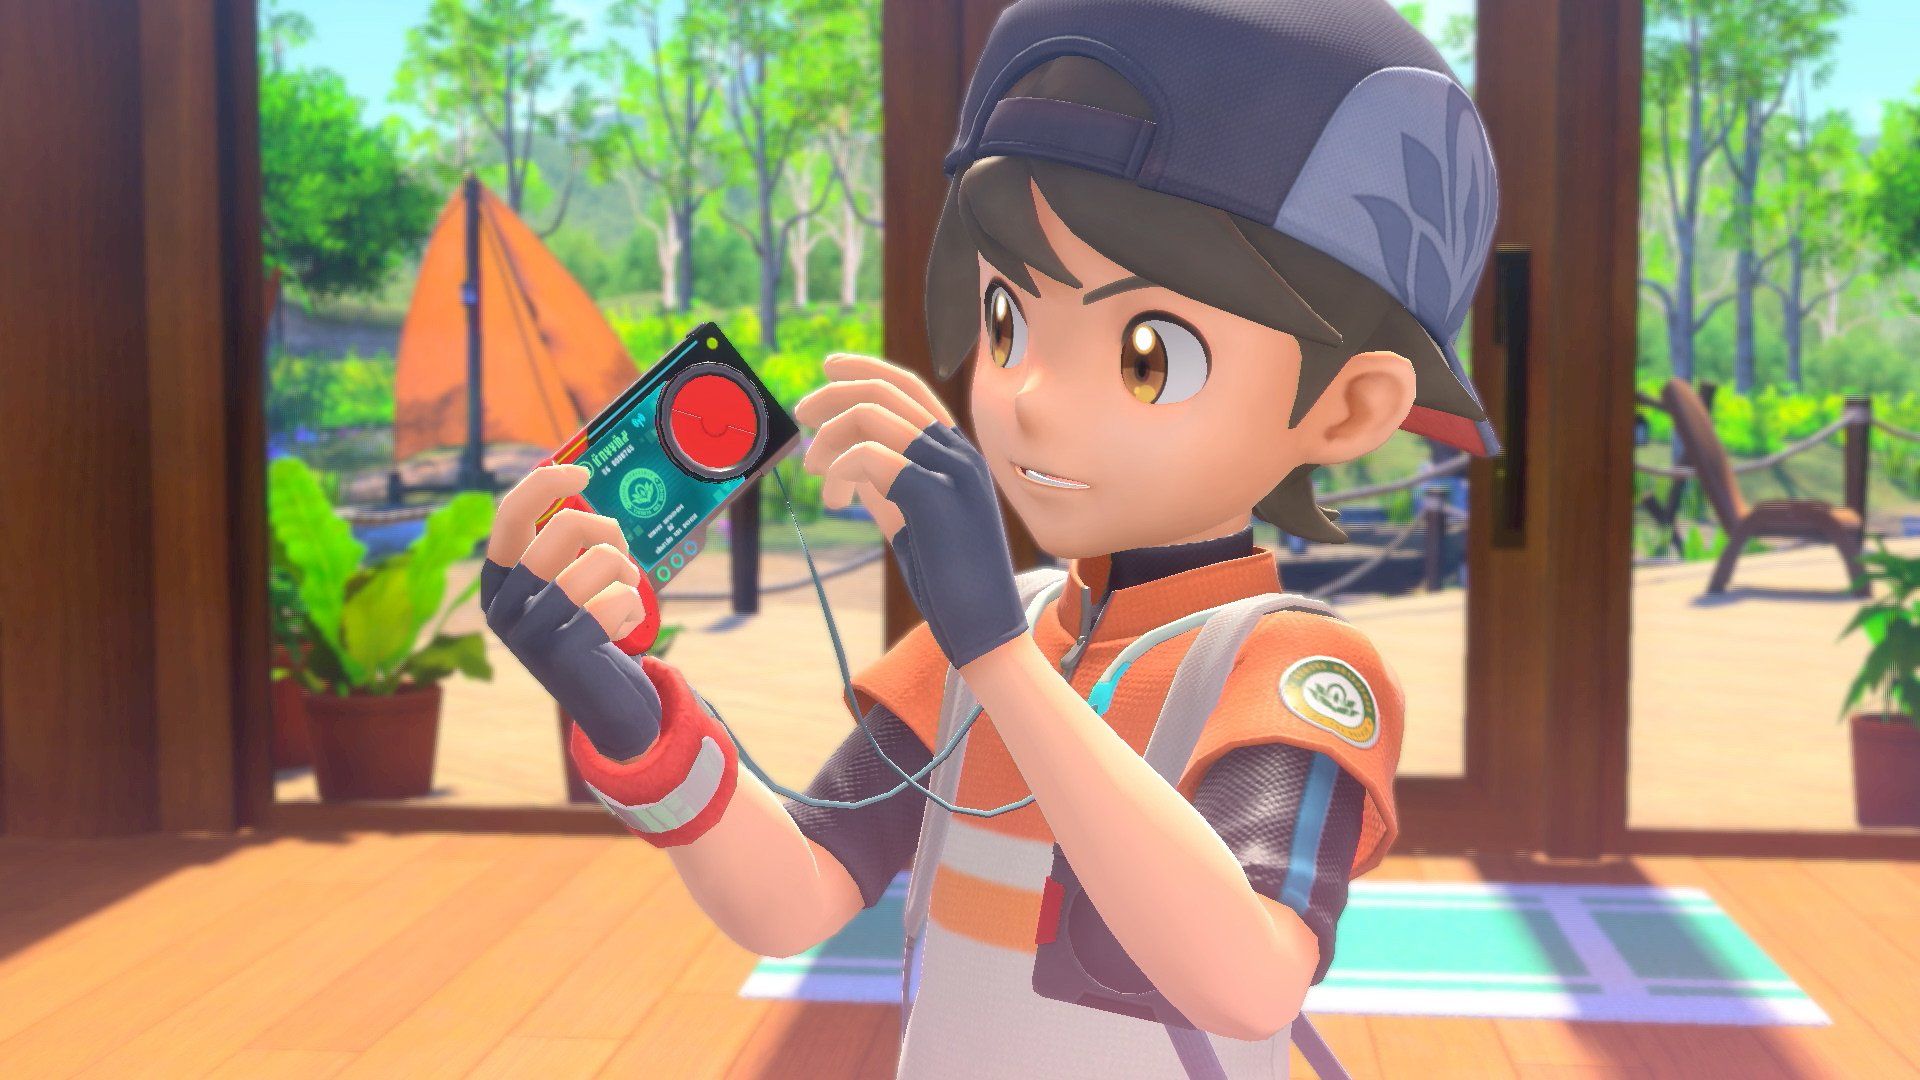 Pokémon will look and behave in different ways when you return to their habitats as you take photos, help Professor Mirror with his research and expand your Photodex in New Pokémon Snap